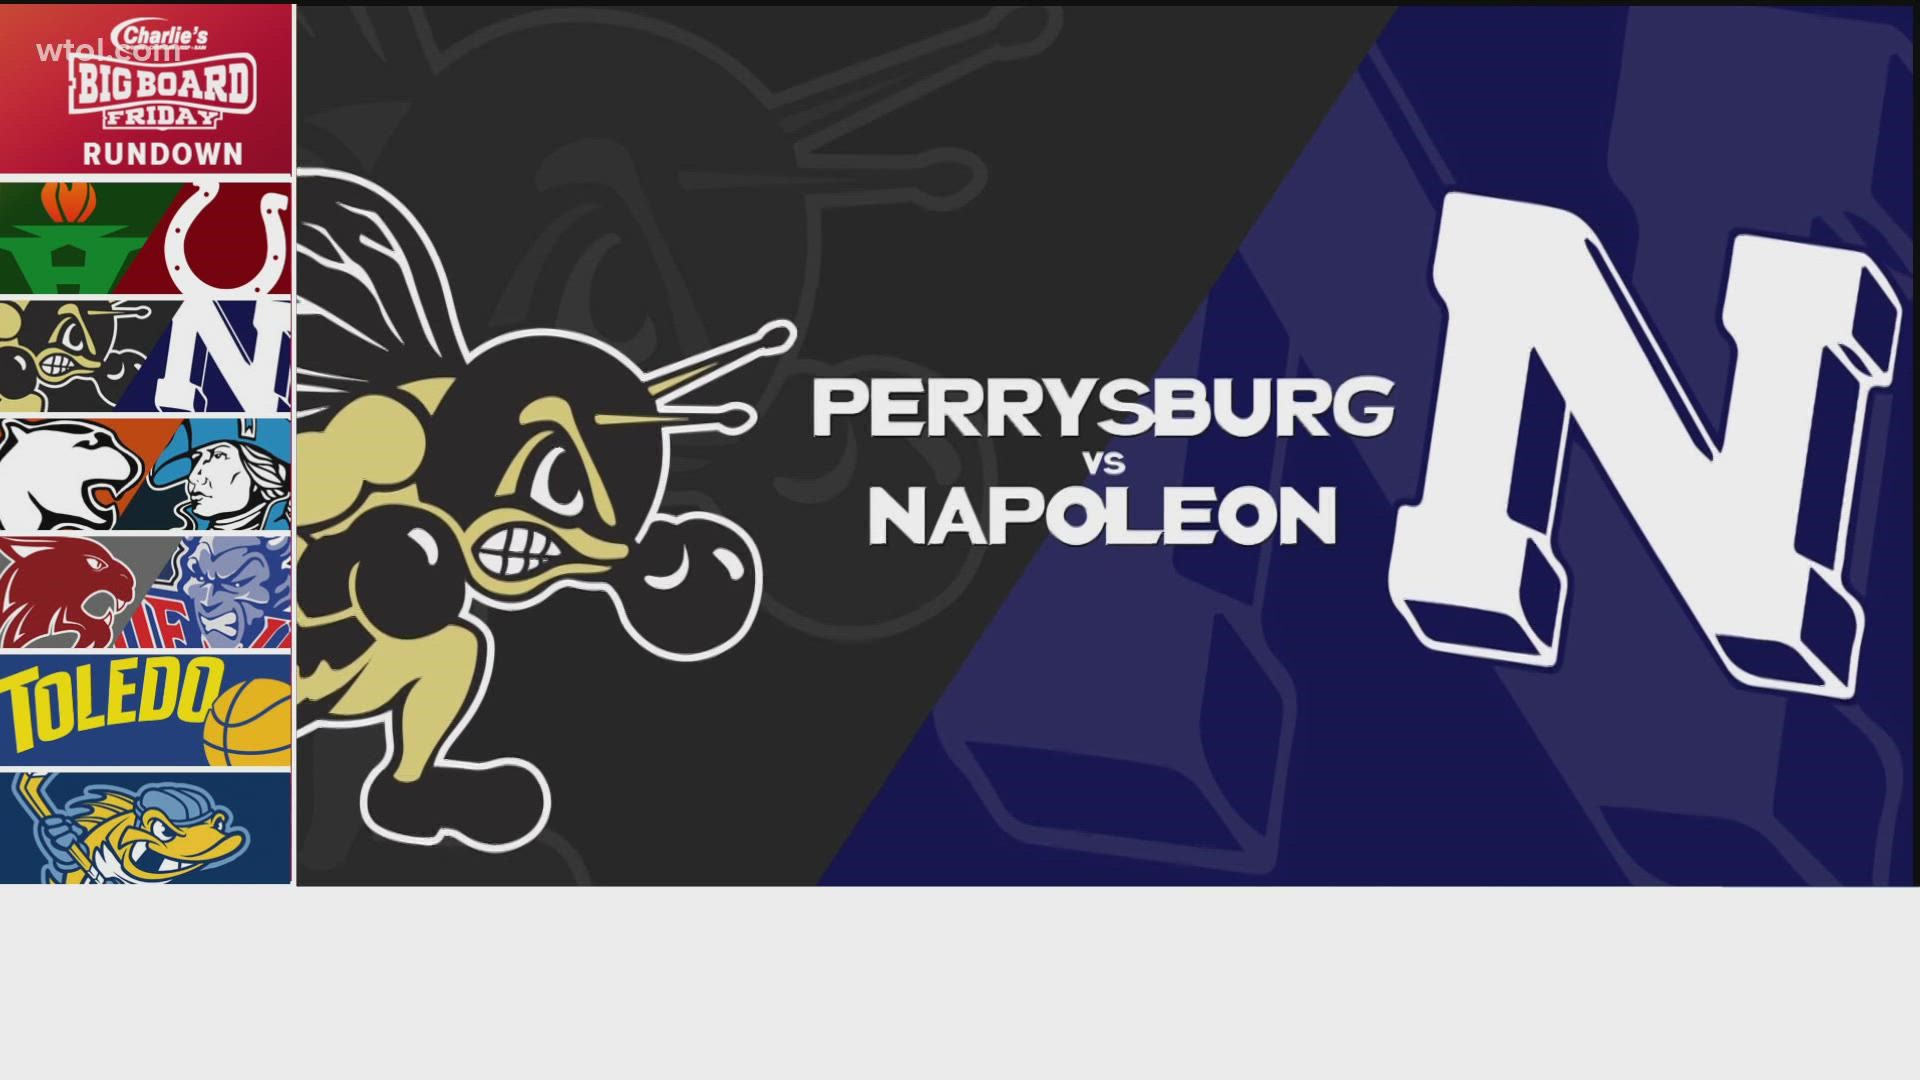 Napoleon took home the win Friday against Perrysburg with a score of 46-34.